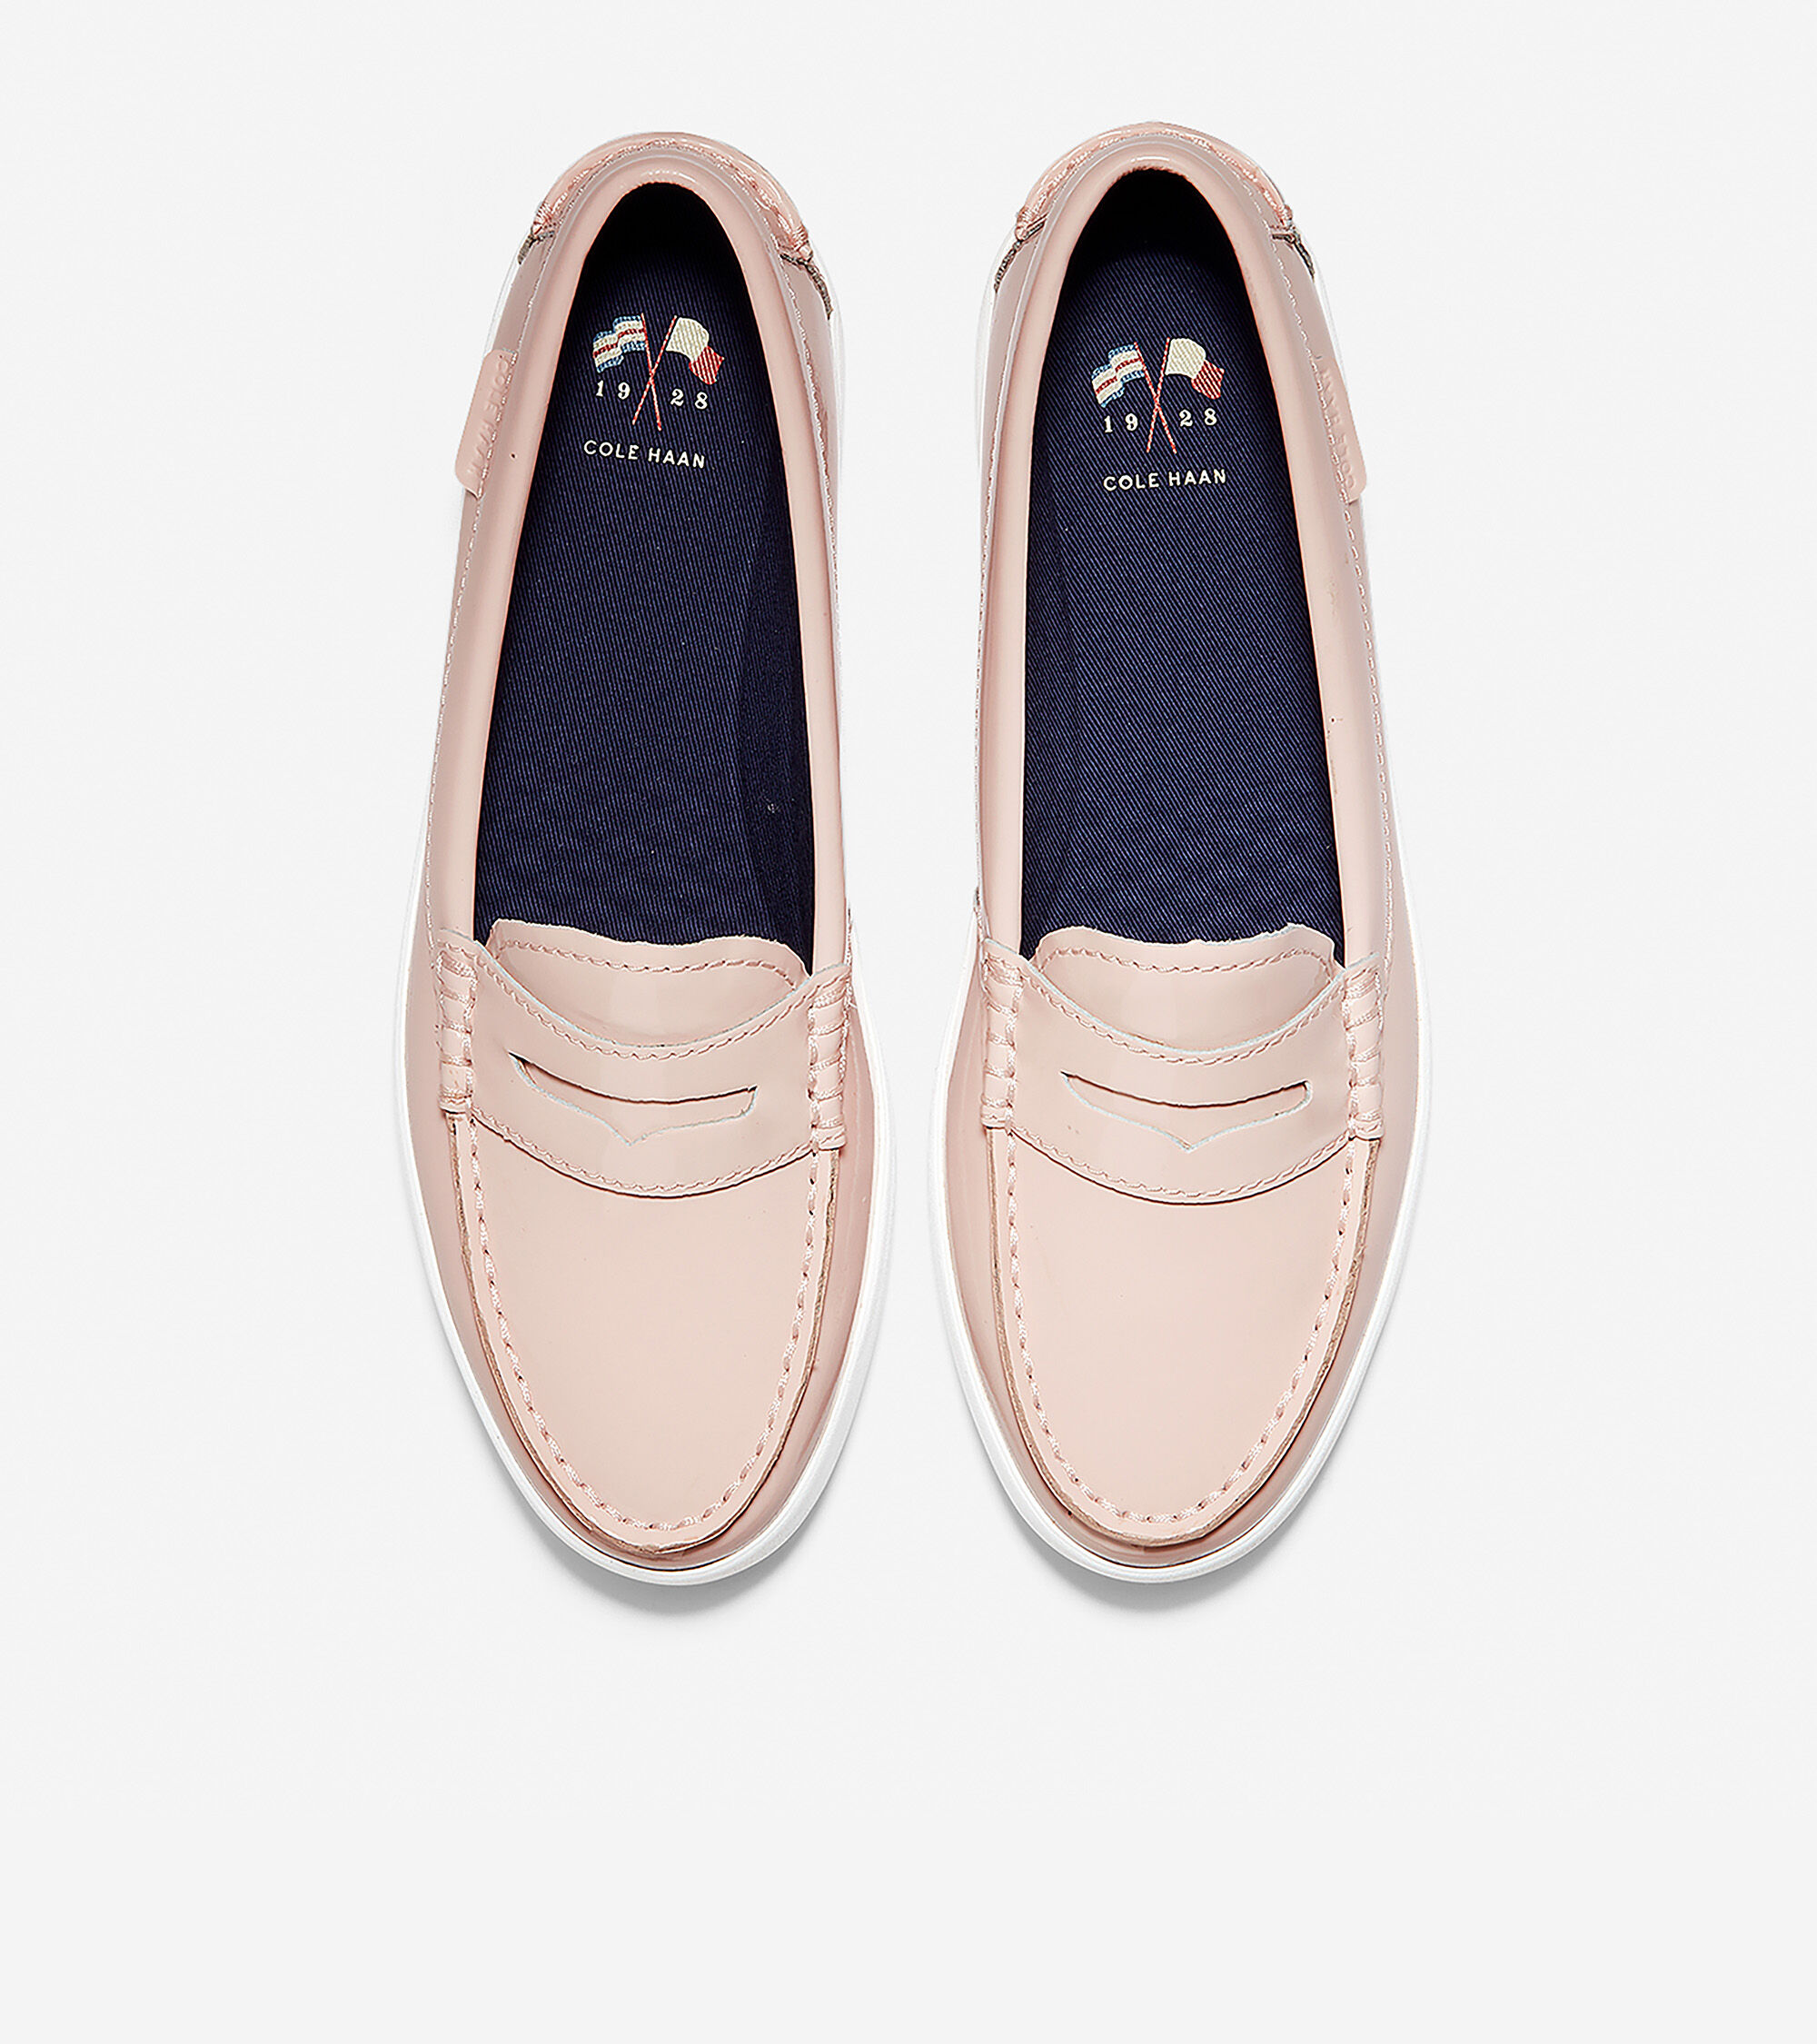 cole haan women's loafers